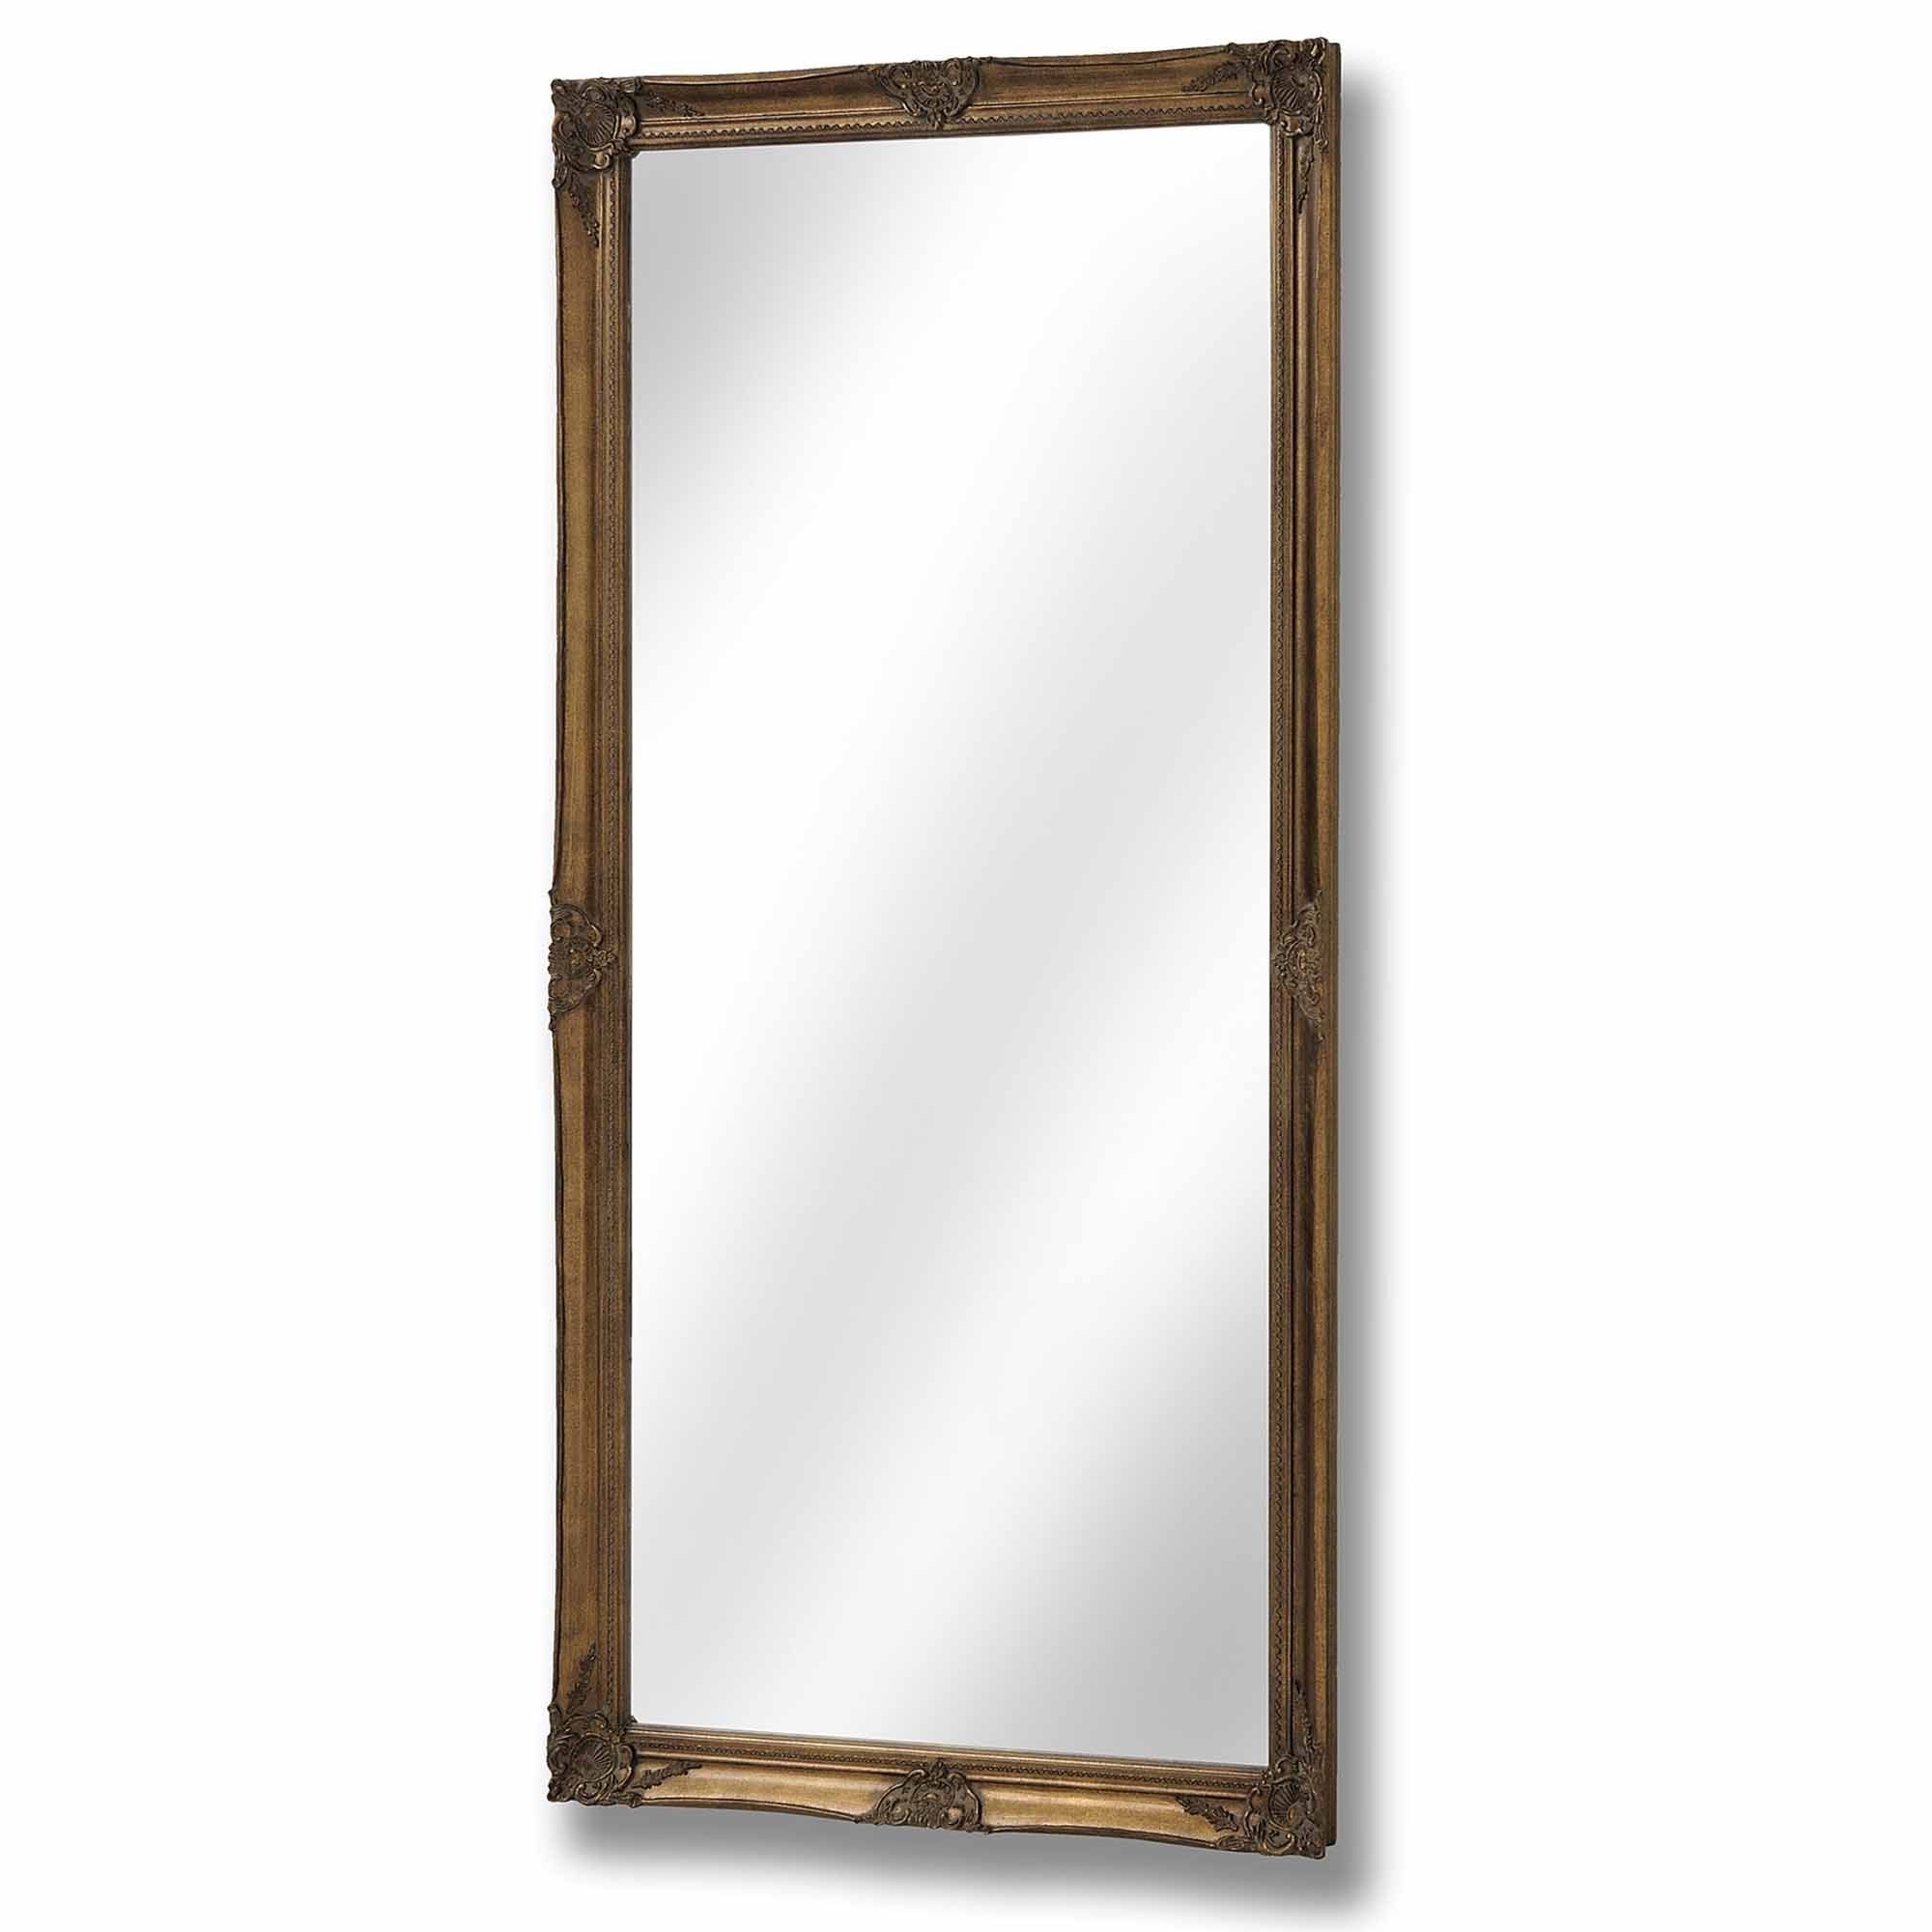 Large Rectangular Antique French Style Gold Mirror | Homesdirect365 With Regard To Warm Gold Rectangular Wall Mirrors (View 15 of 15)